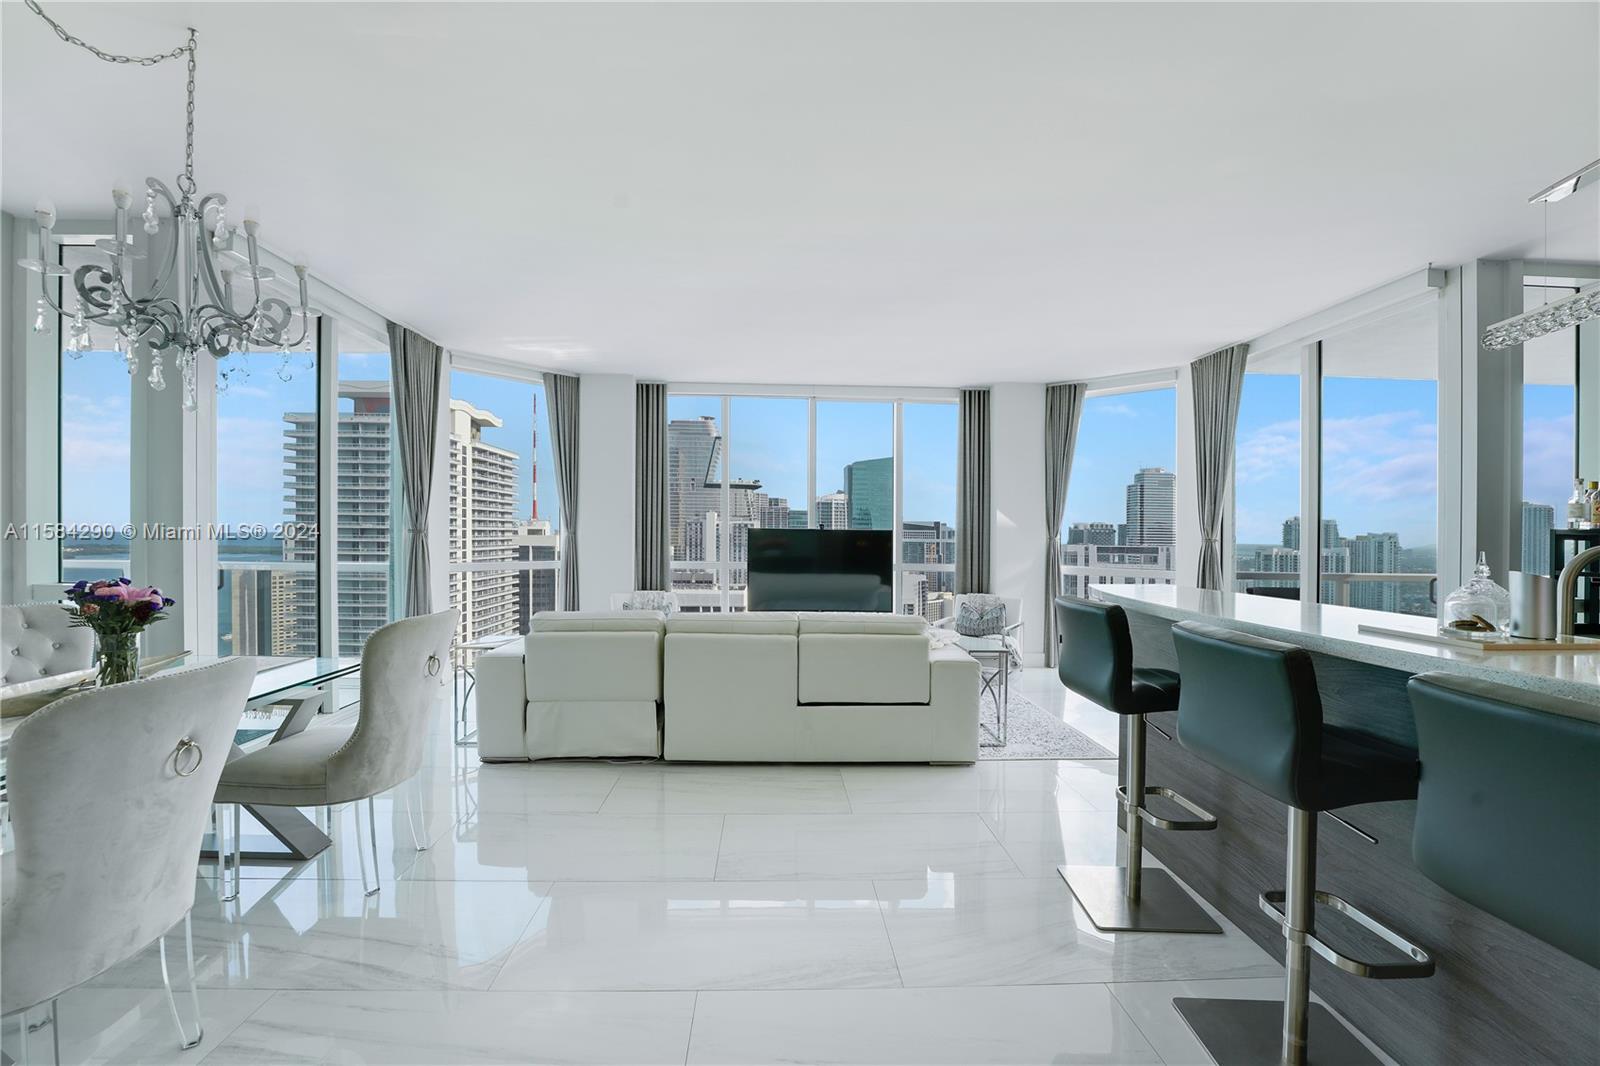 Experience the epitome of urban luxury in this exquisite 3-bed, 3-bath condo located in the heart of Miami's epicenter. Enjoy breathtaking skyline views through floor-to-ceiling windows. Indulge your culinary skills in the modern kitchen W/quartz countertops & top-of-the-line appliances. Entertain guests in the gorgeous modern living space W/180 degree water & city views. Retreat to your primary suite W/a lavish spa-like bathroom & walk-in closet. Exclusive amenities include 4 pools, security, private storage, gym W/daily classes, spa & 24-hr security. Don't miss your chance to own this urban gem, perfectly situated in the city's hottest neighborhood. Enjoy bayfront park or walk to Miami World Center to enjoy endless dining, shopping & entertainment options. Live the Miami dream today!